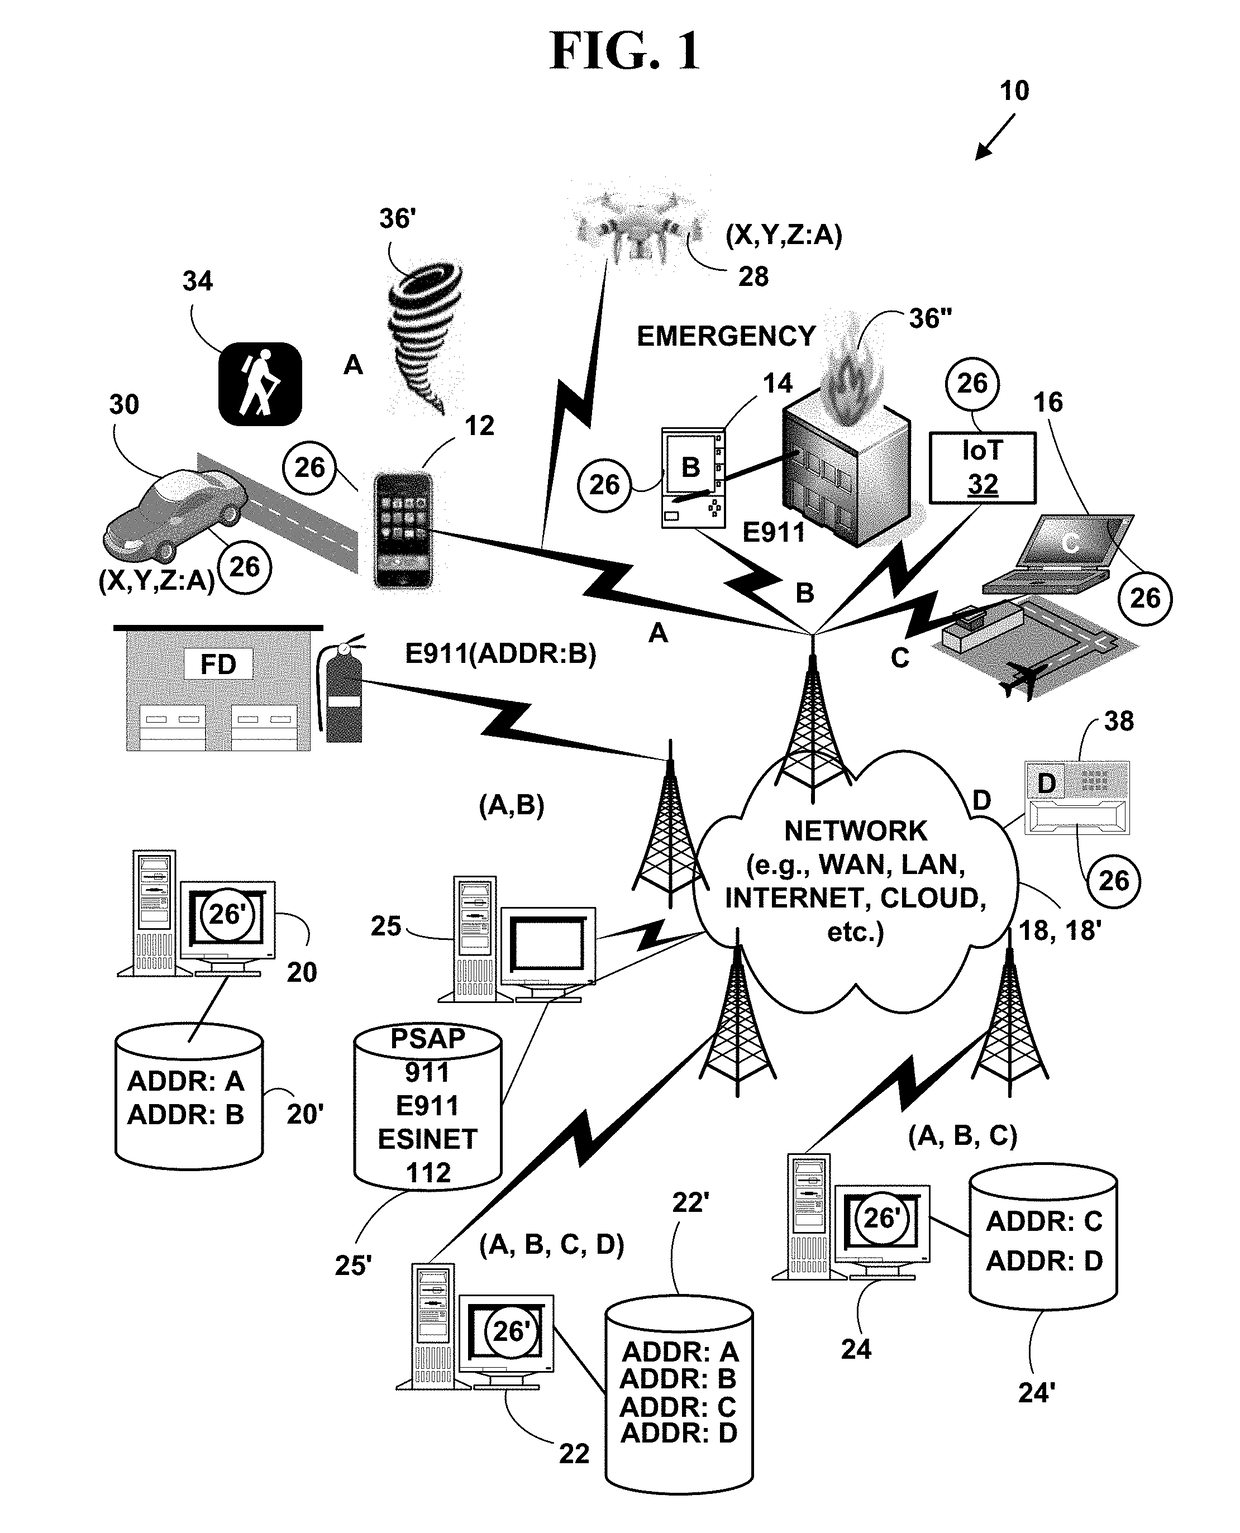 Method and system for locating a network device in an emergency situation